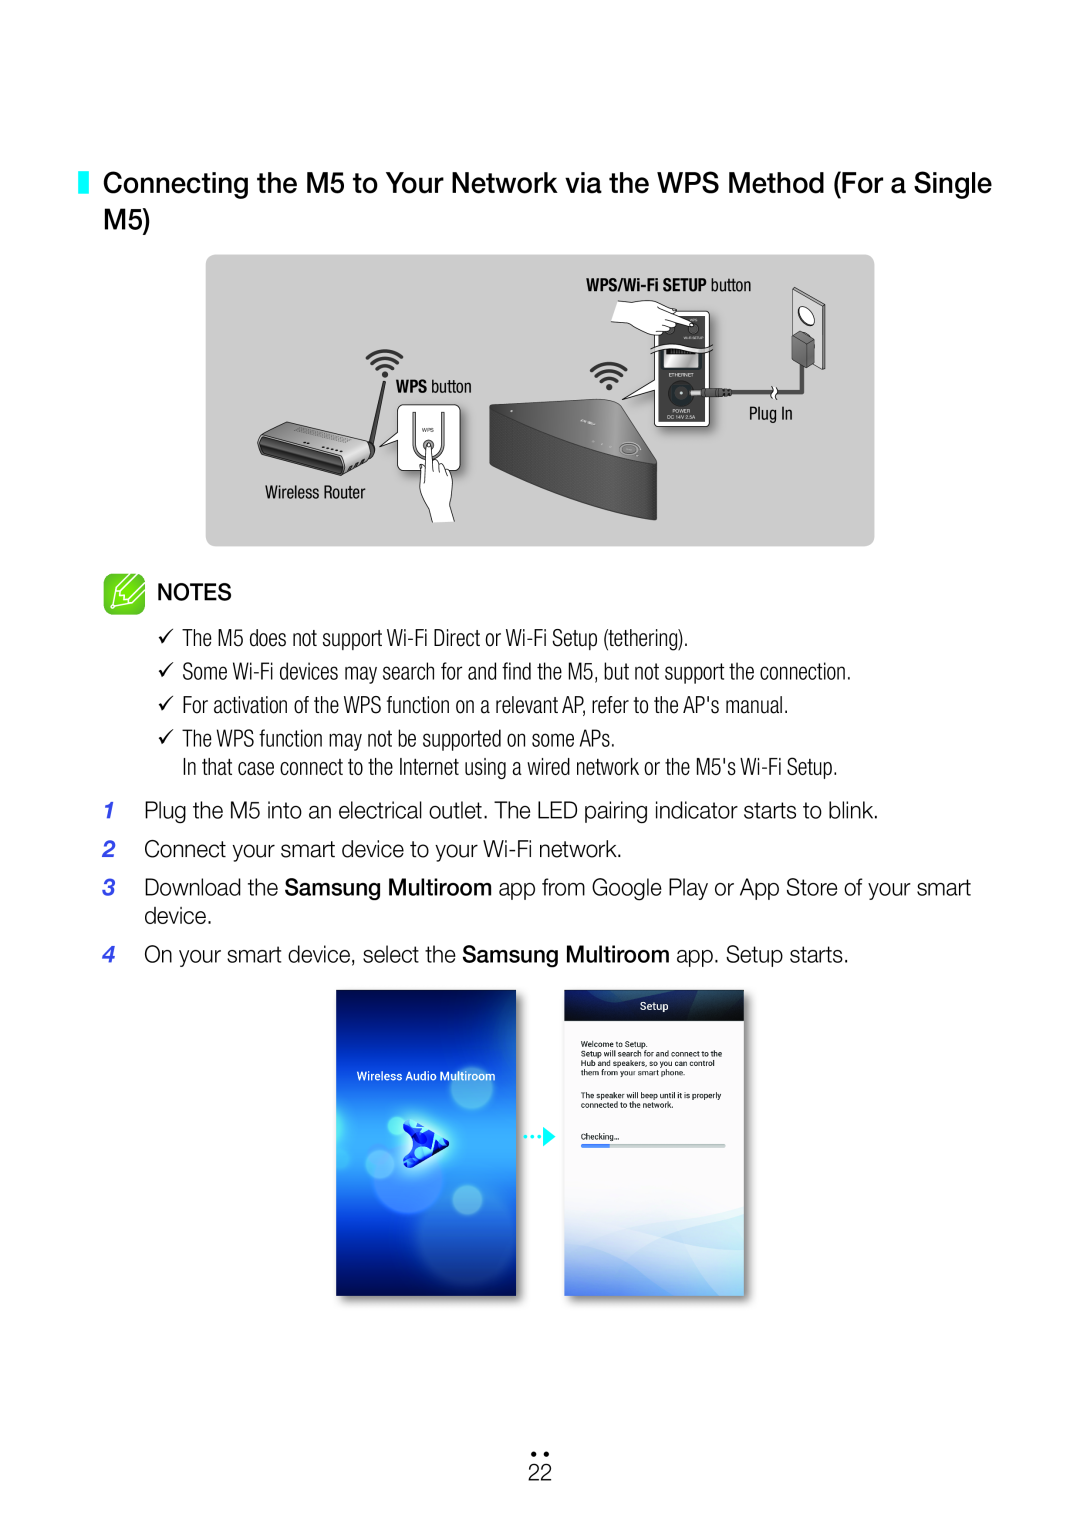 Samsung user manual Connecting the M5 to Your Network via the WPS Method For a Single M5 